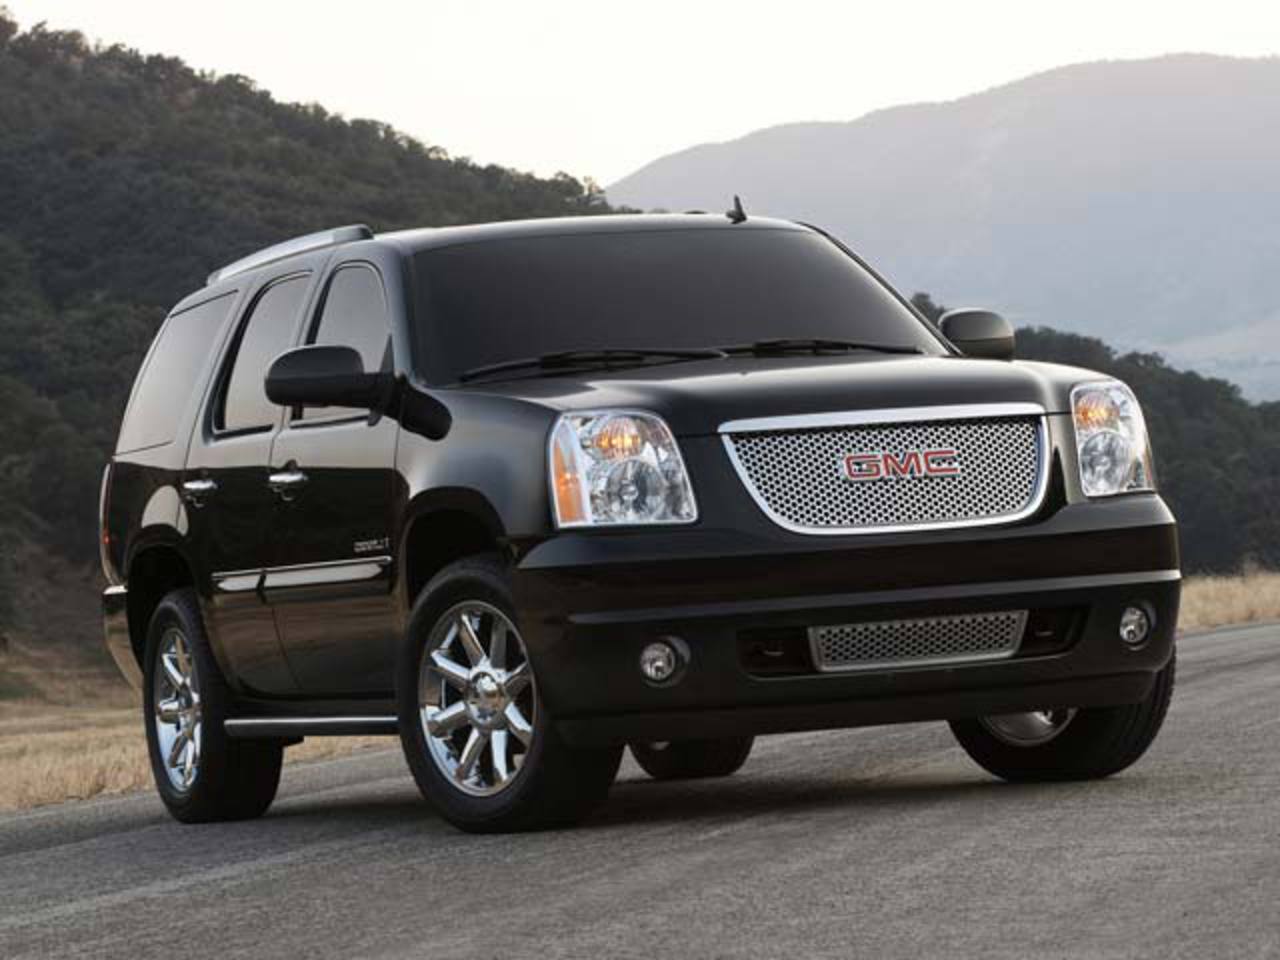 GM's big SUVs harken back to an era of conspicuous consumption,